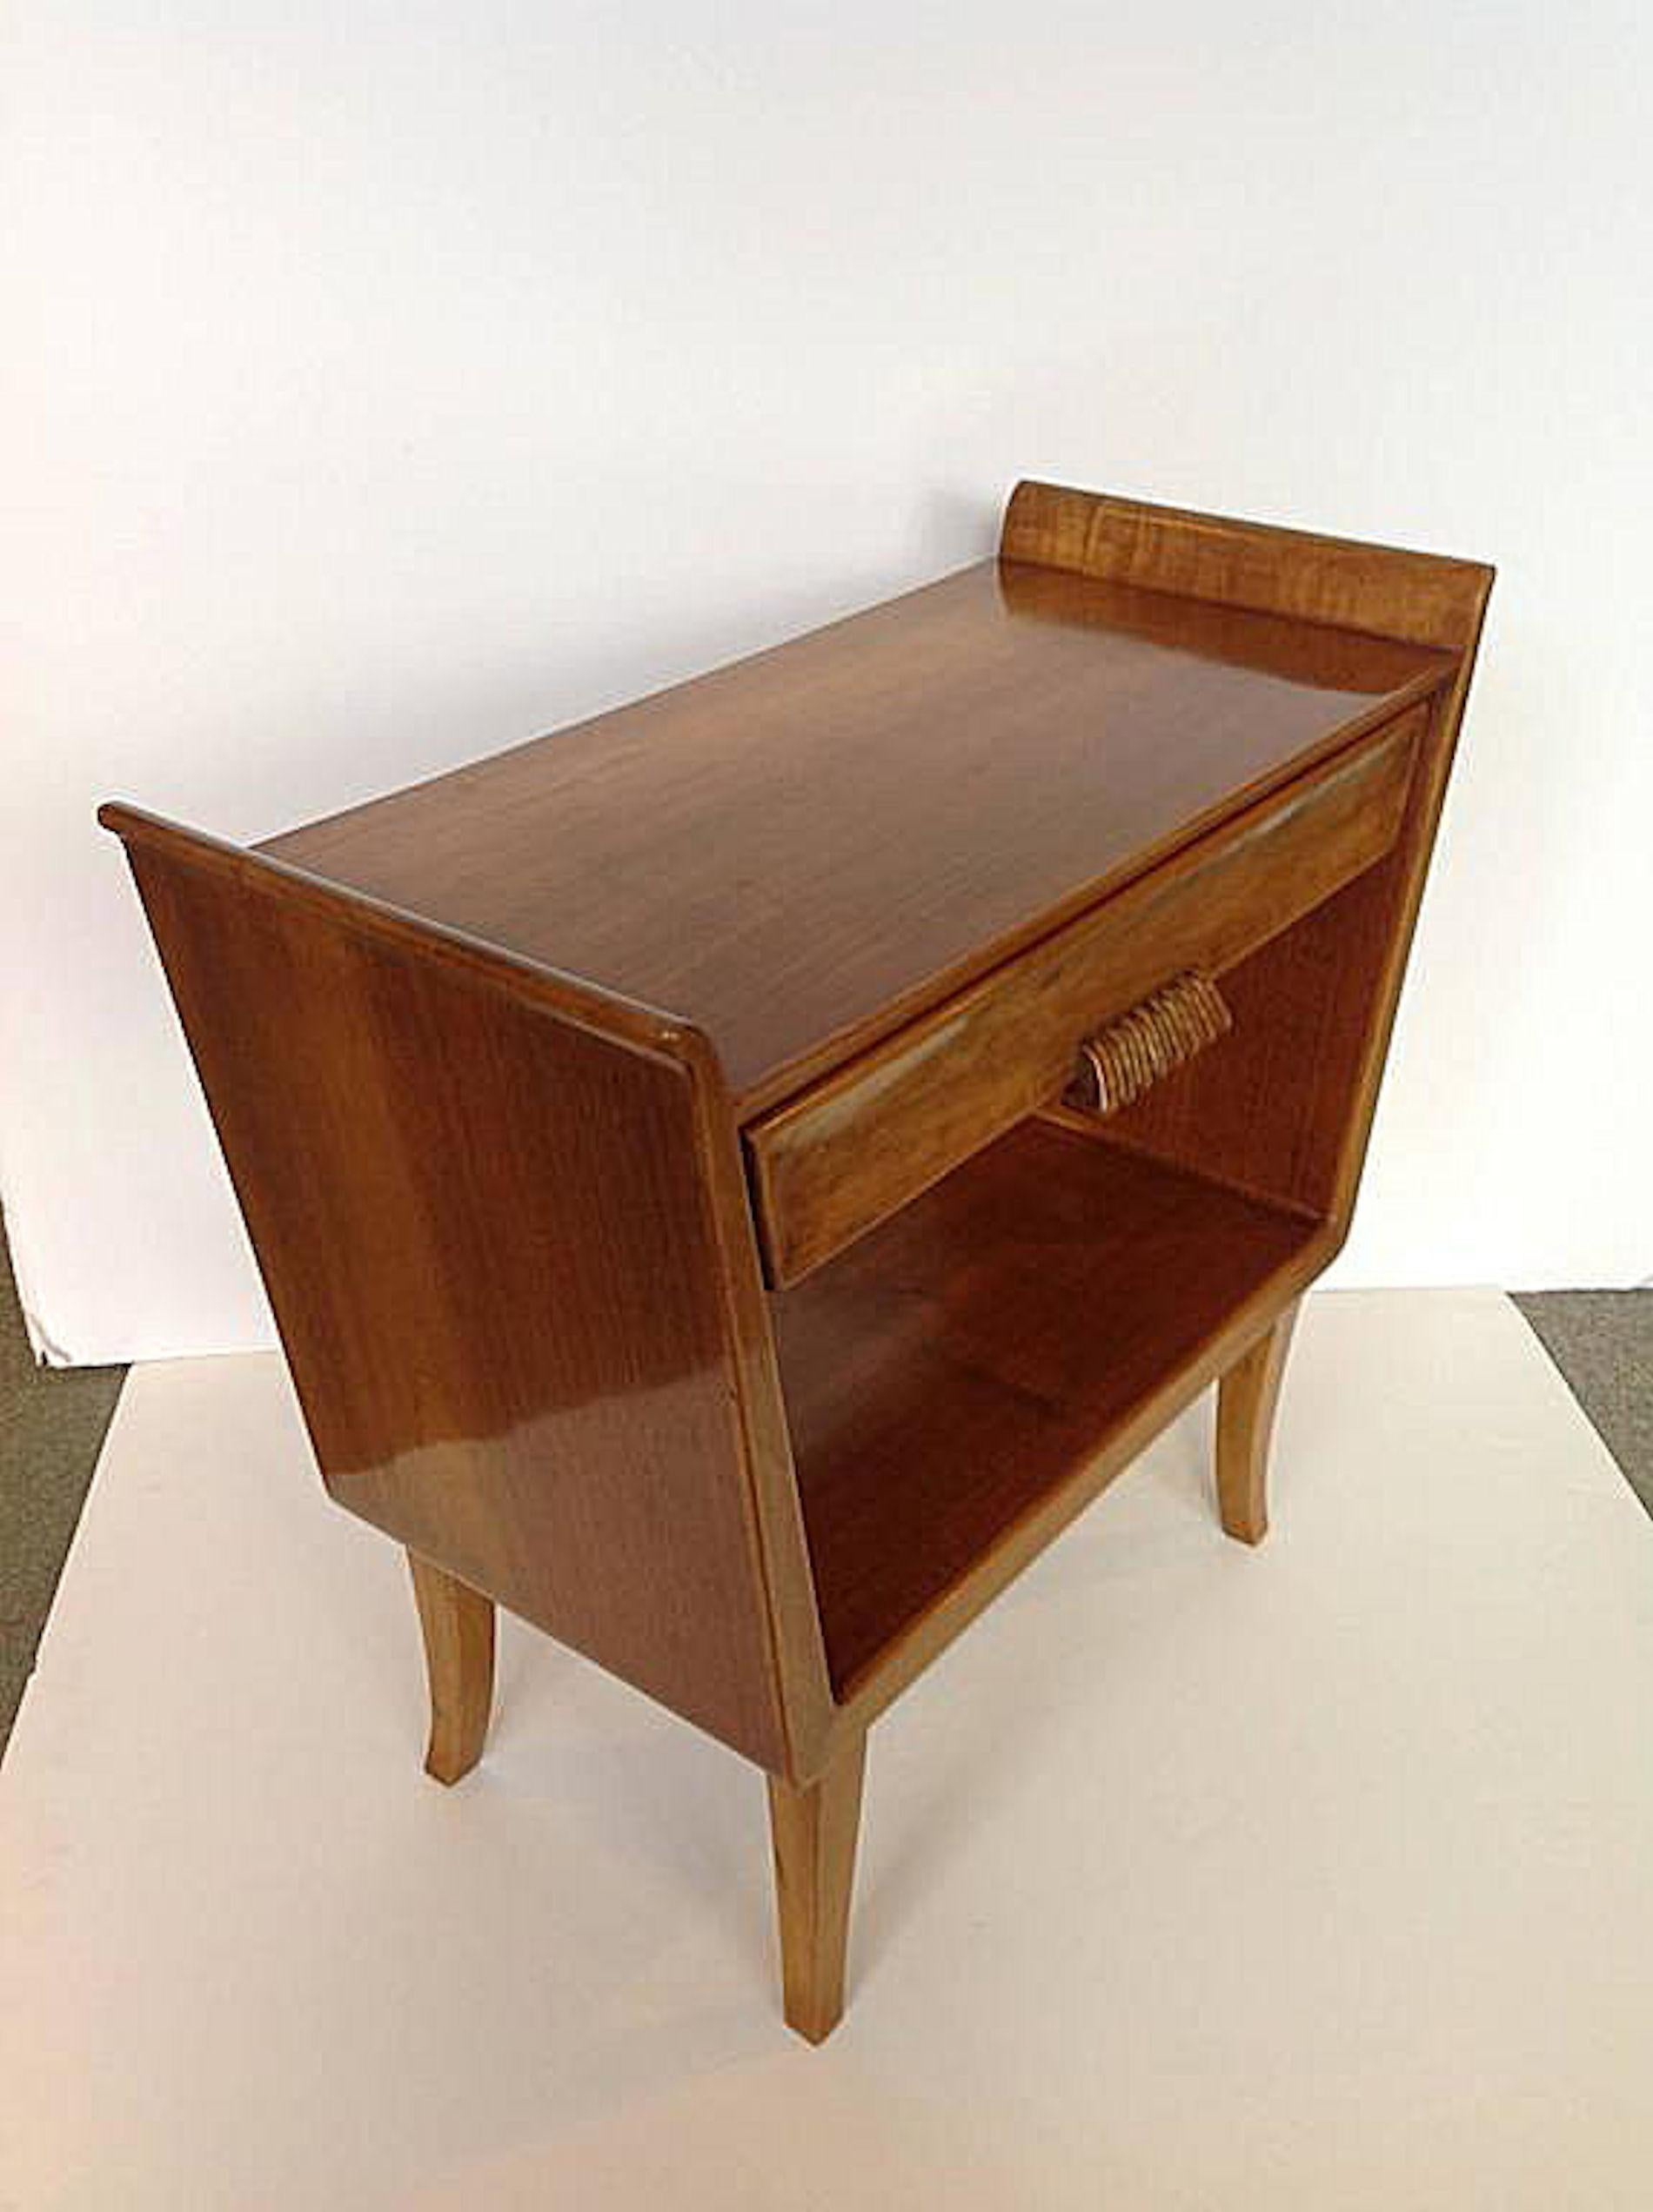 Mid-20th Century Pair of Italian Mid-Century Modern Fruit Wood Bedside Tables or Cabinets, 1960s